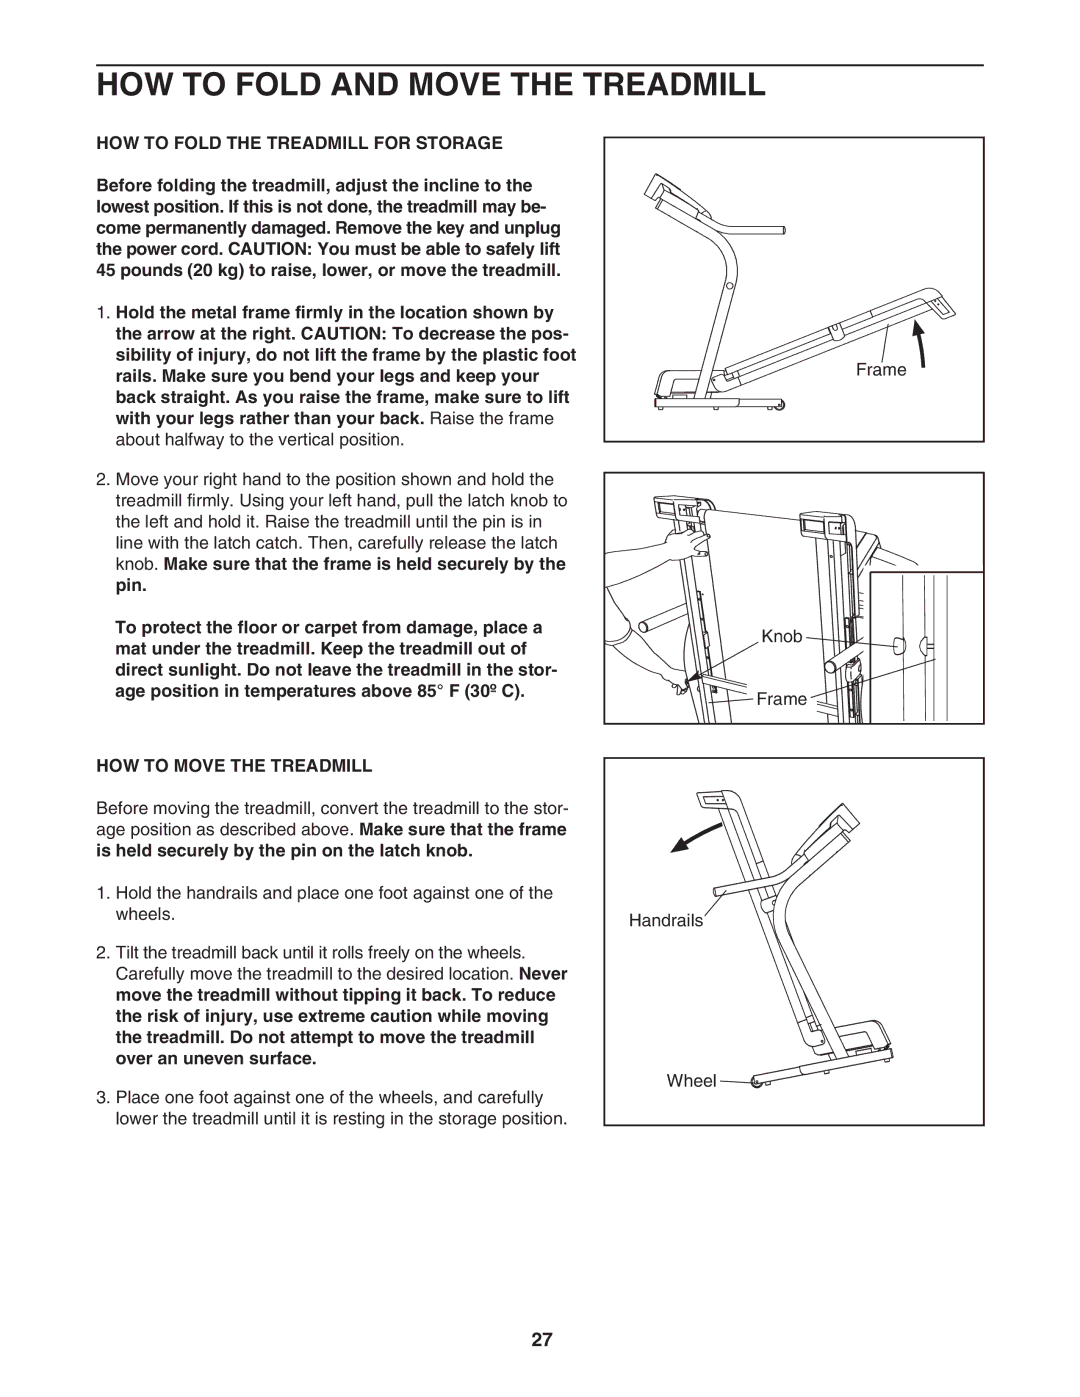 NordicTrack 30601.0 HOW to Fold and Move the Treadmill, HOW to Fold the Treadmill for Storage, HOW to Move the Treadmill 